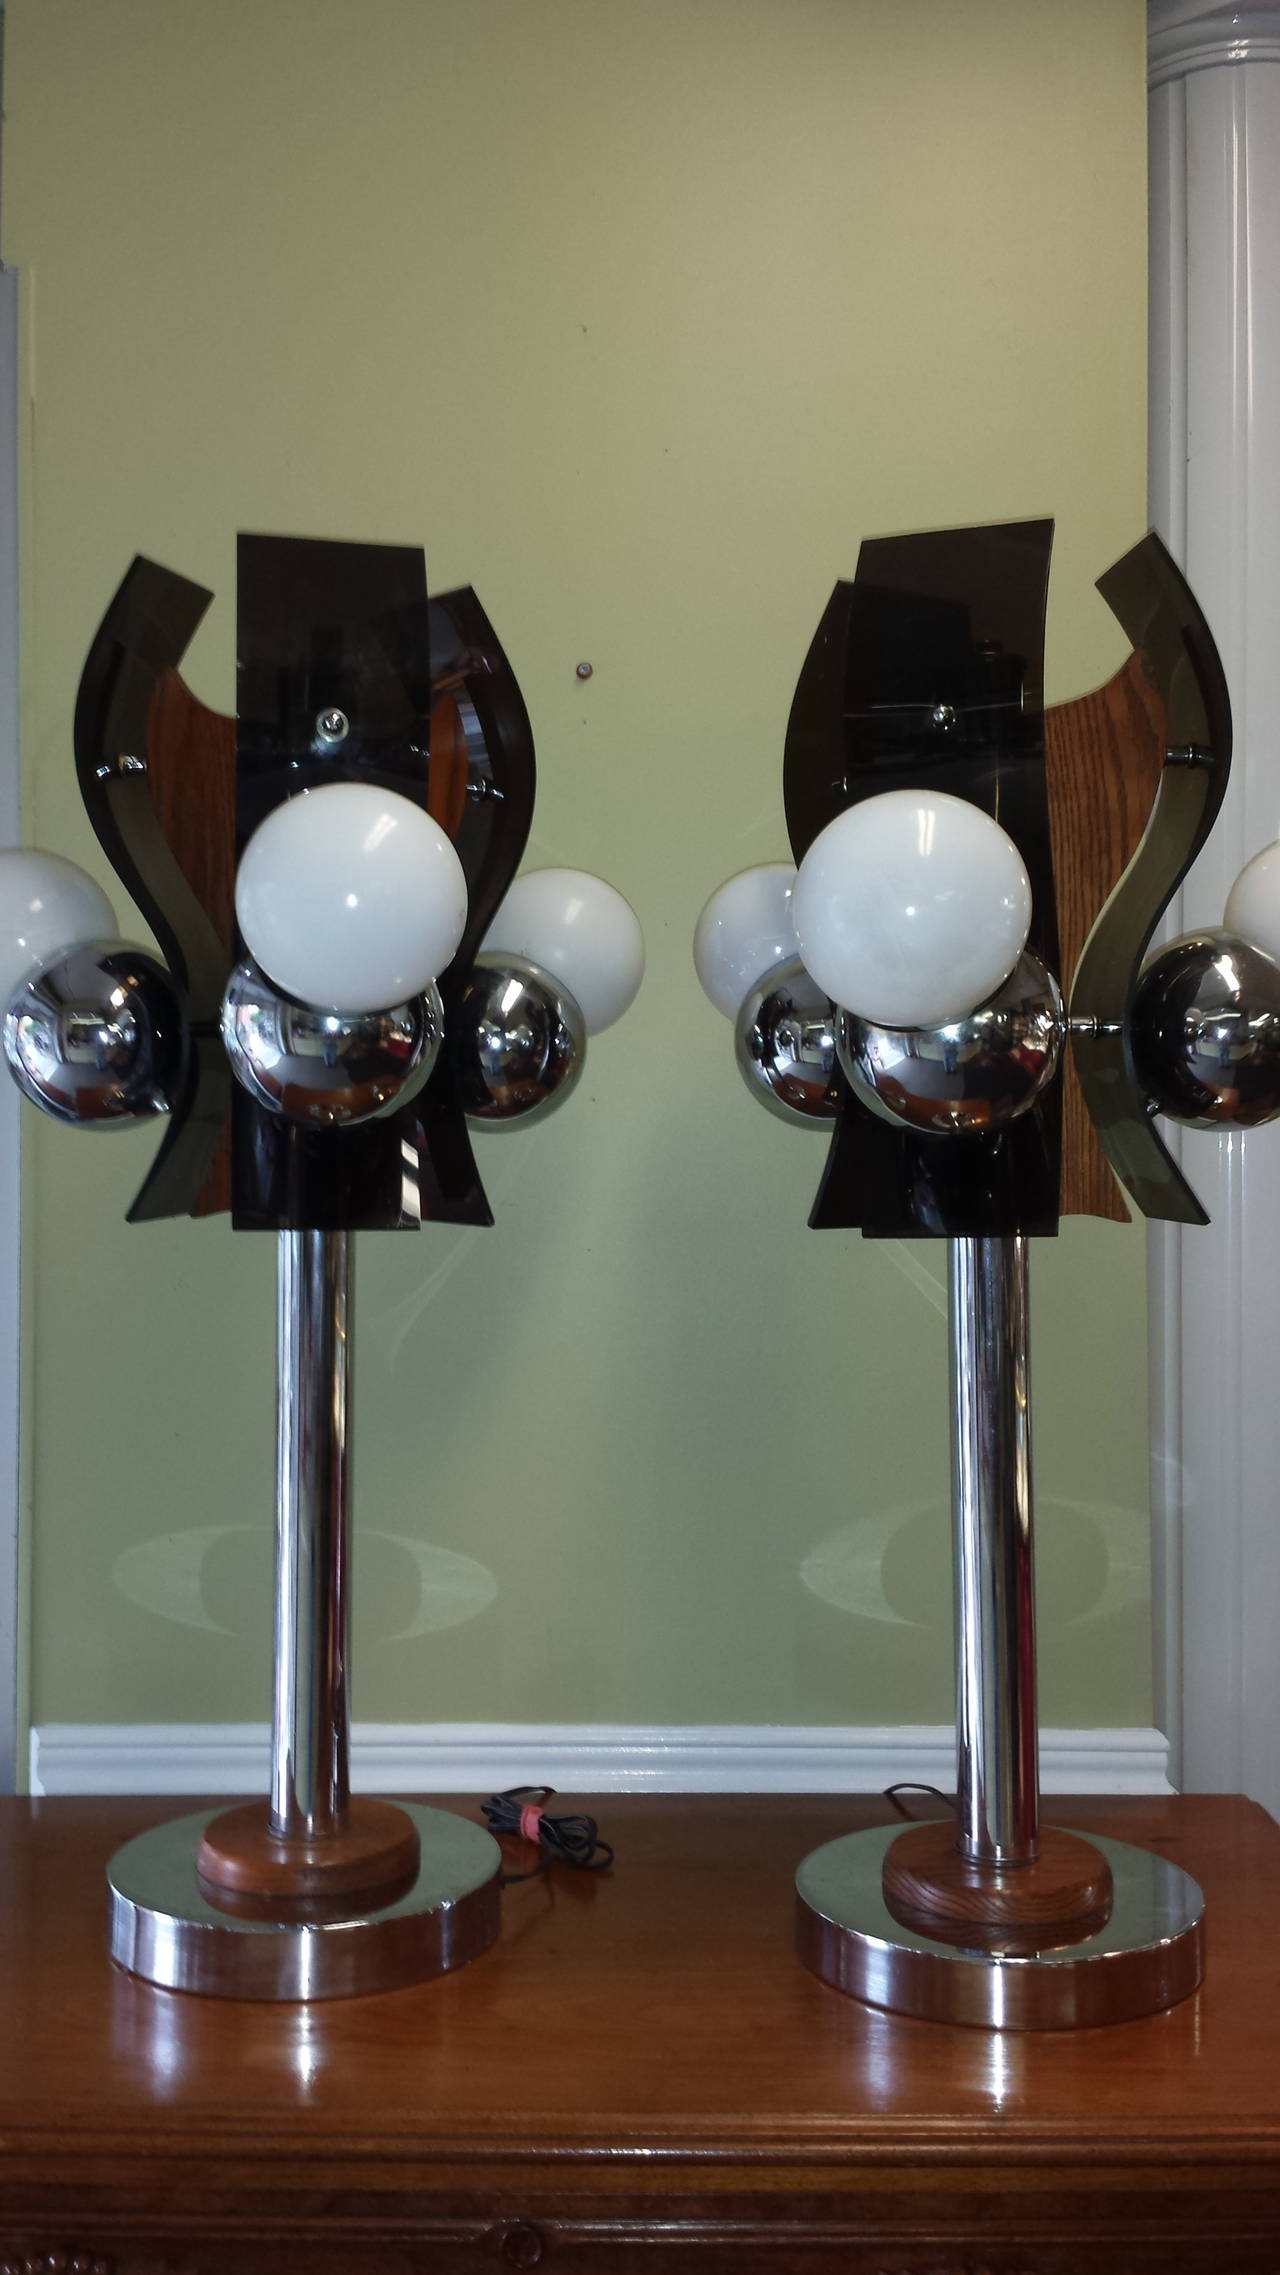 Mid-Century Chrome, Black Plexiglass and Oak Table Lamps Circa 1960's-1970's, with Globe style sockets and bulbs three setting switches on each lamp, one, two or three lights on or off. The smoked black plexiglass is double curved and is mounted on